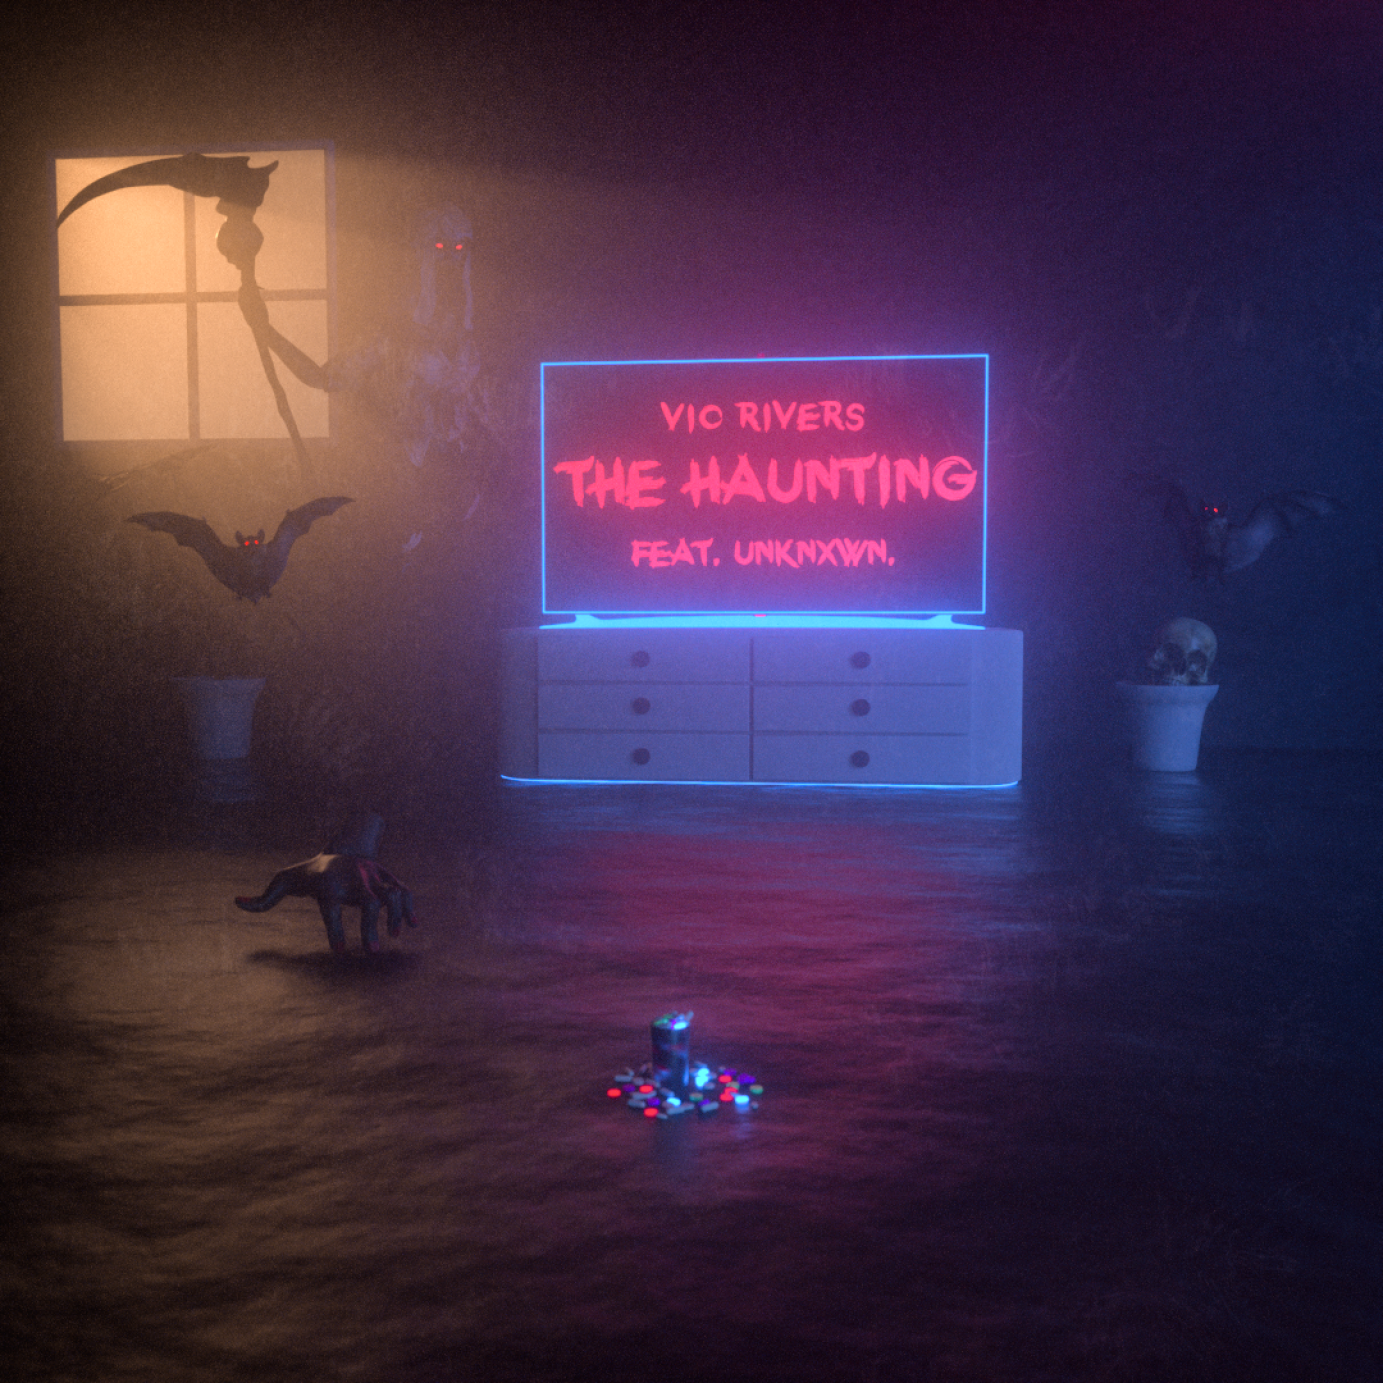 The Haunting- Vic Rivers X Rkt. Johnny